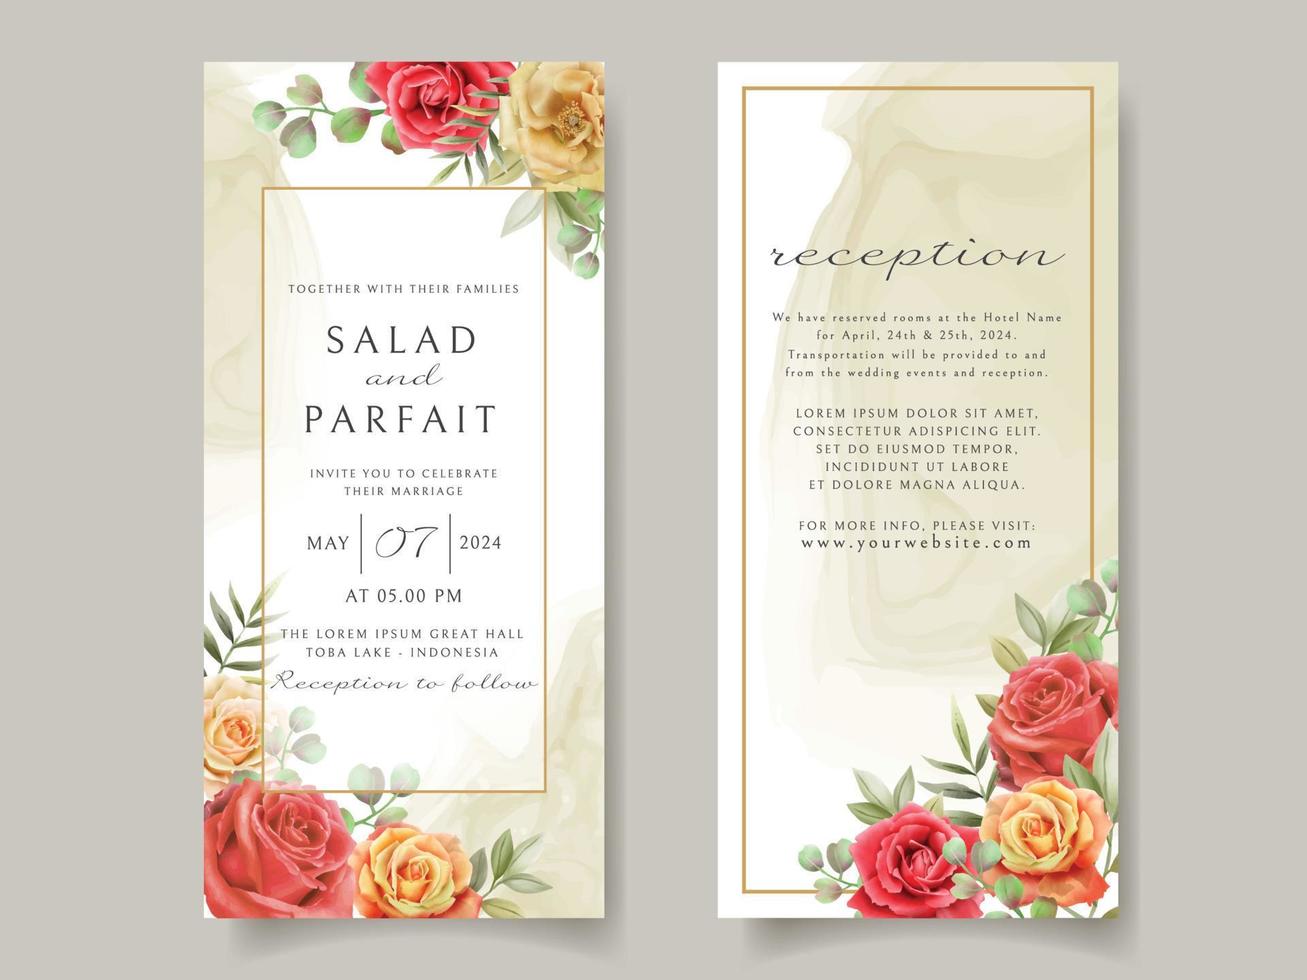 Wedding invitation card template with red roses design vector